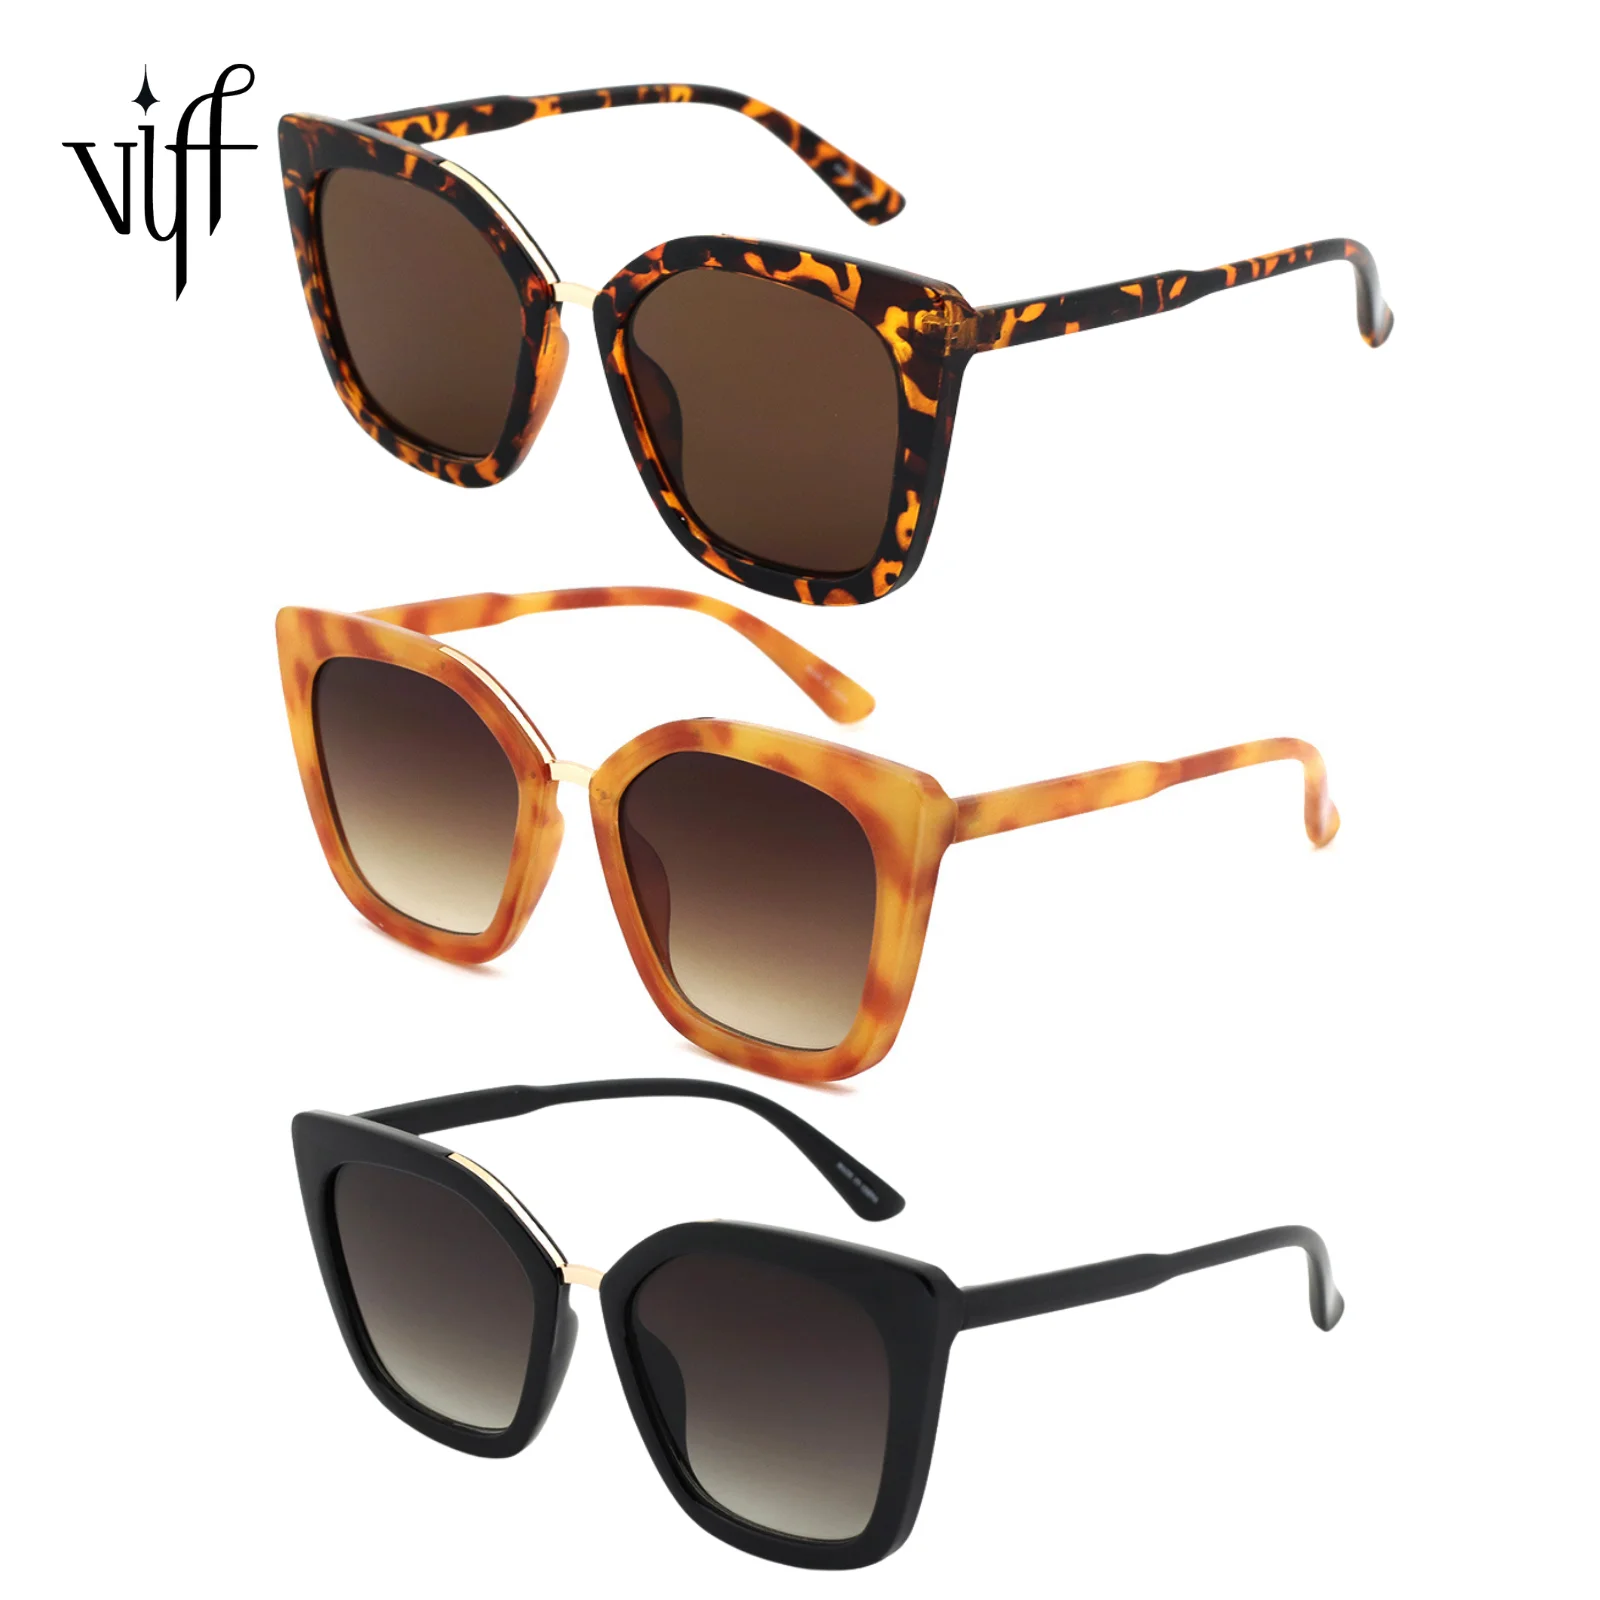 

VIFF HP20557 Vintage Big Frame Sun Glasses River Hot Amazon Seller Chinese Manufacturer Quality fashion Oversized Sunglasses, Multy and can be customized